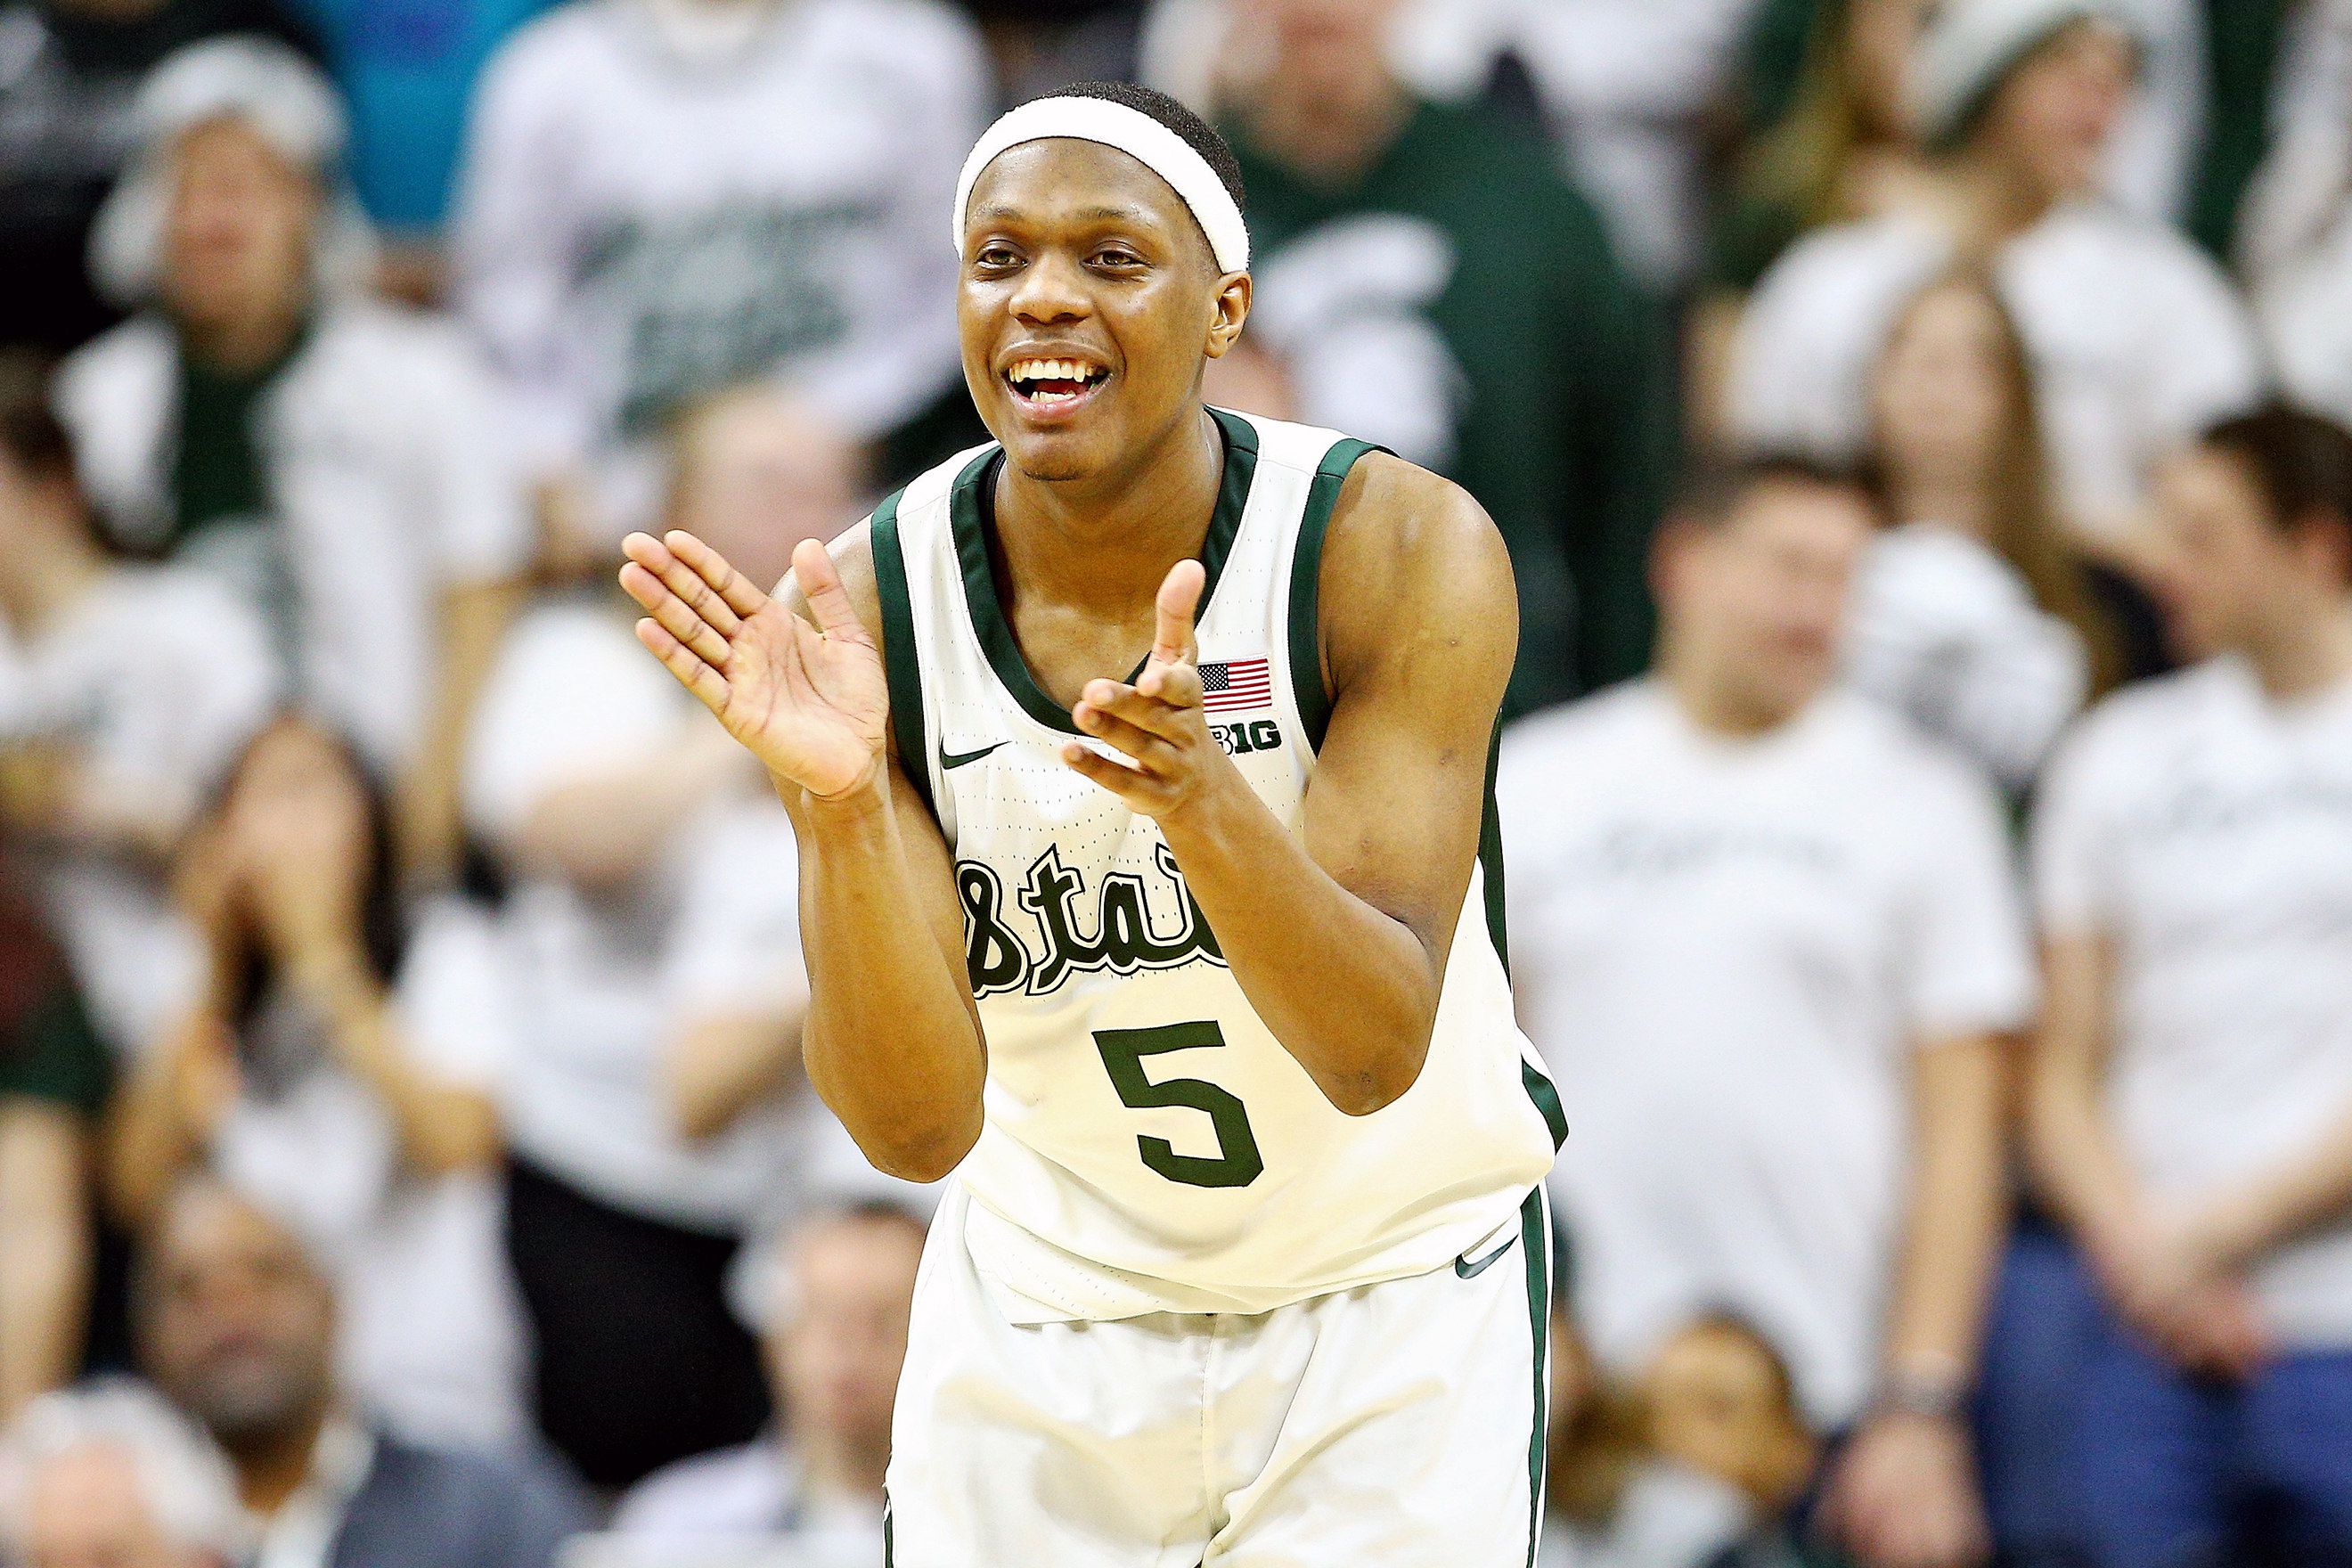 Michigan State Mens Basketball Schedule 2022 23 See Michigan State's Full 2019-20 Basketball Schedule - Mlive.com